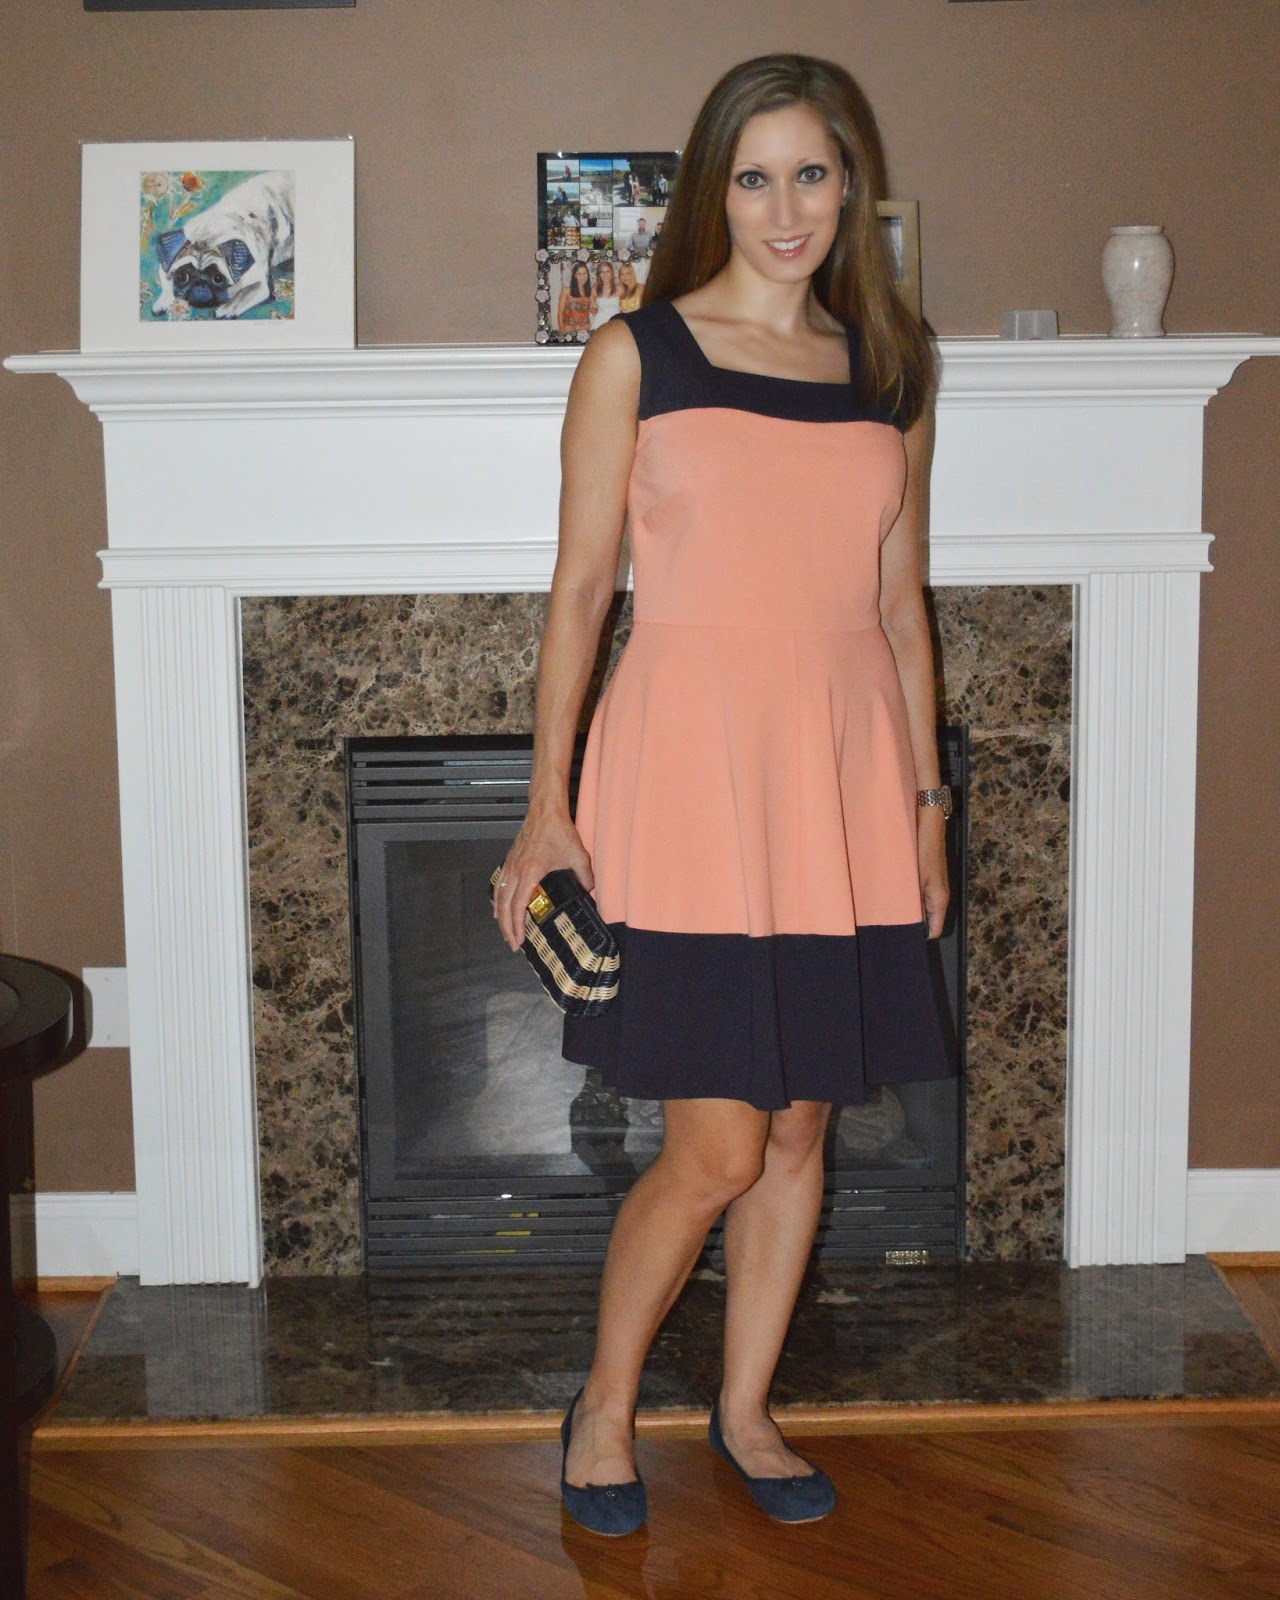 Everyday Fashionista - Atlanta Blogger: Outfit of the Day: July 3, 2014